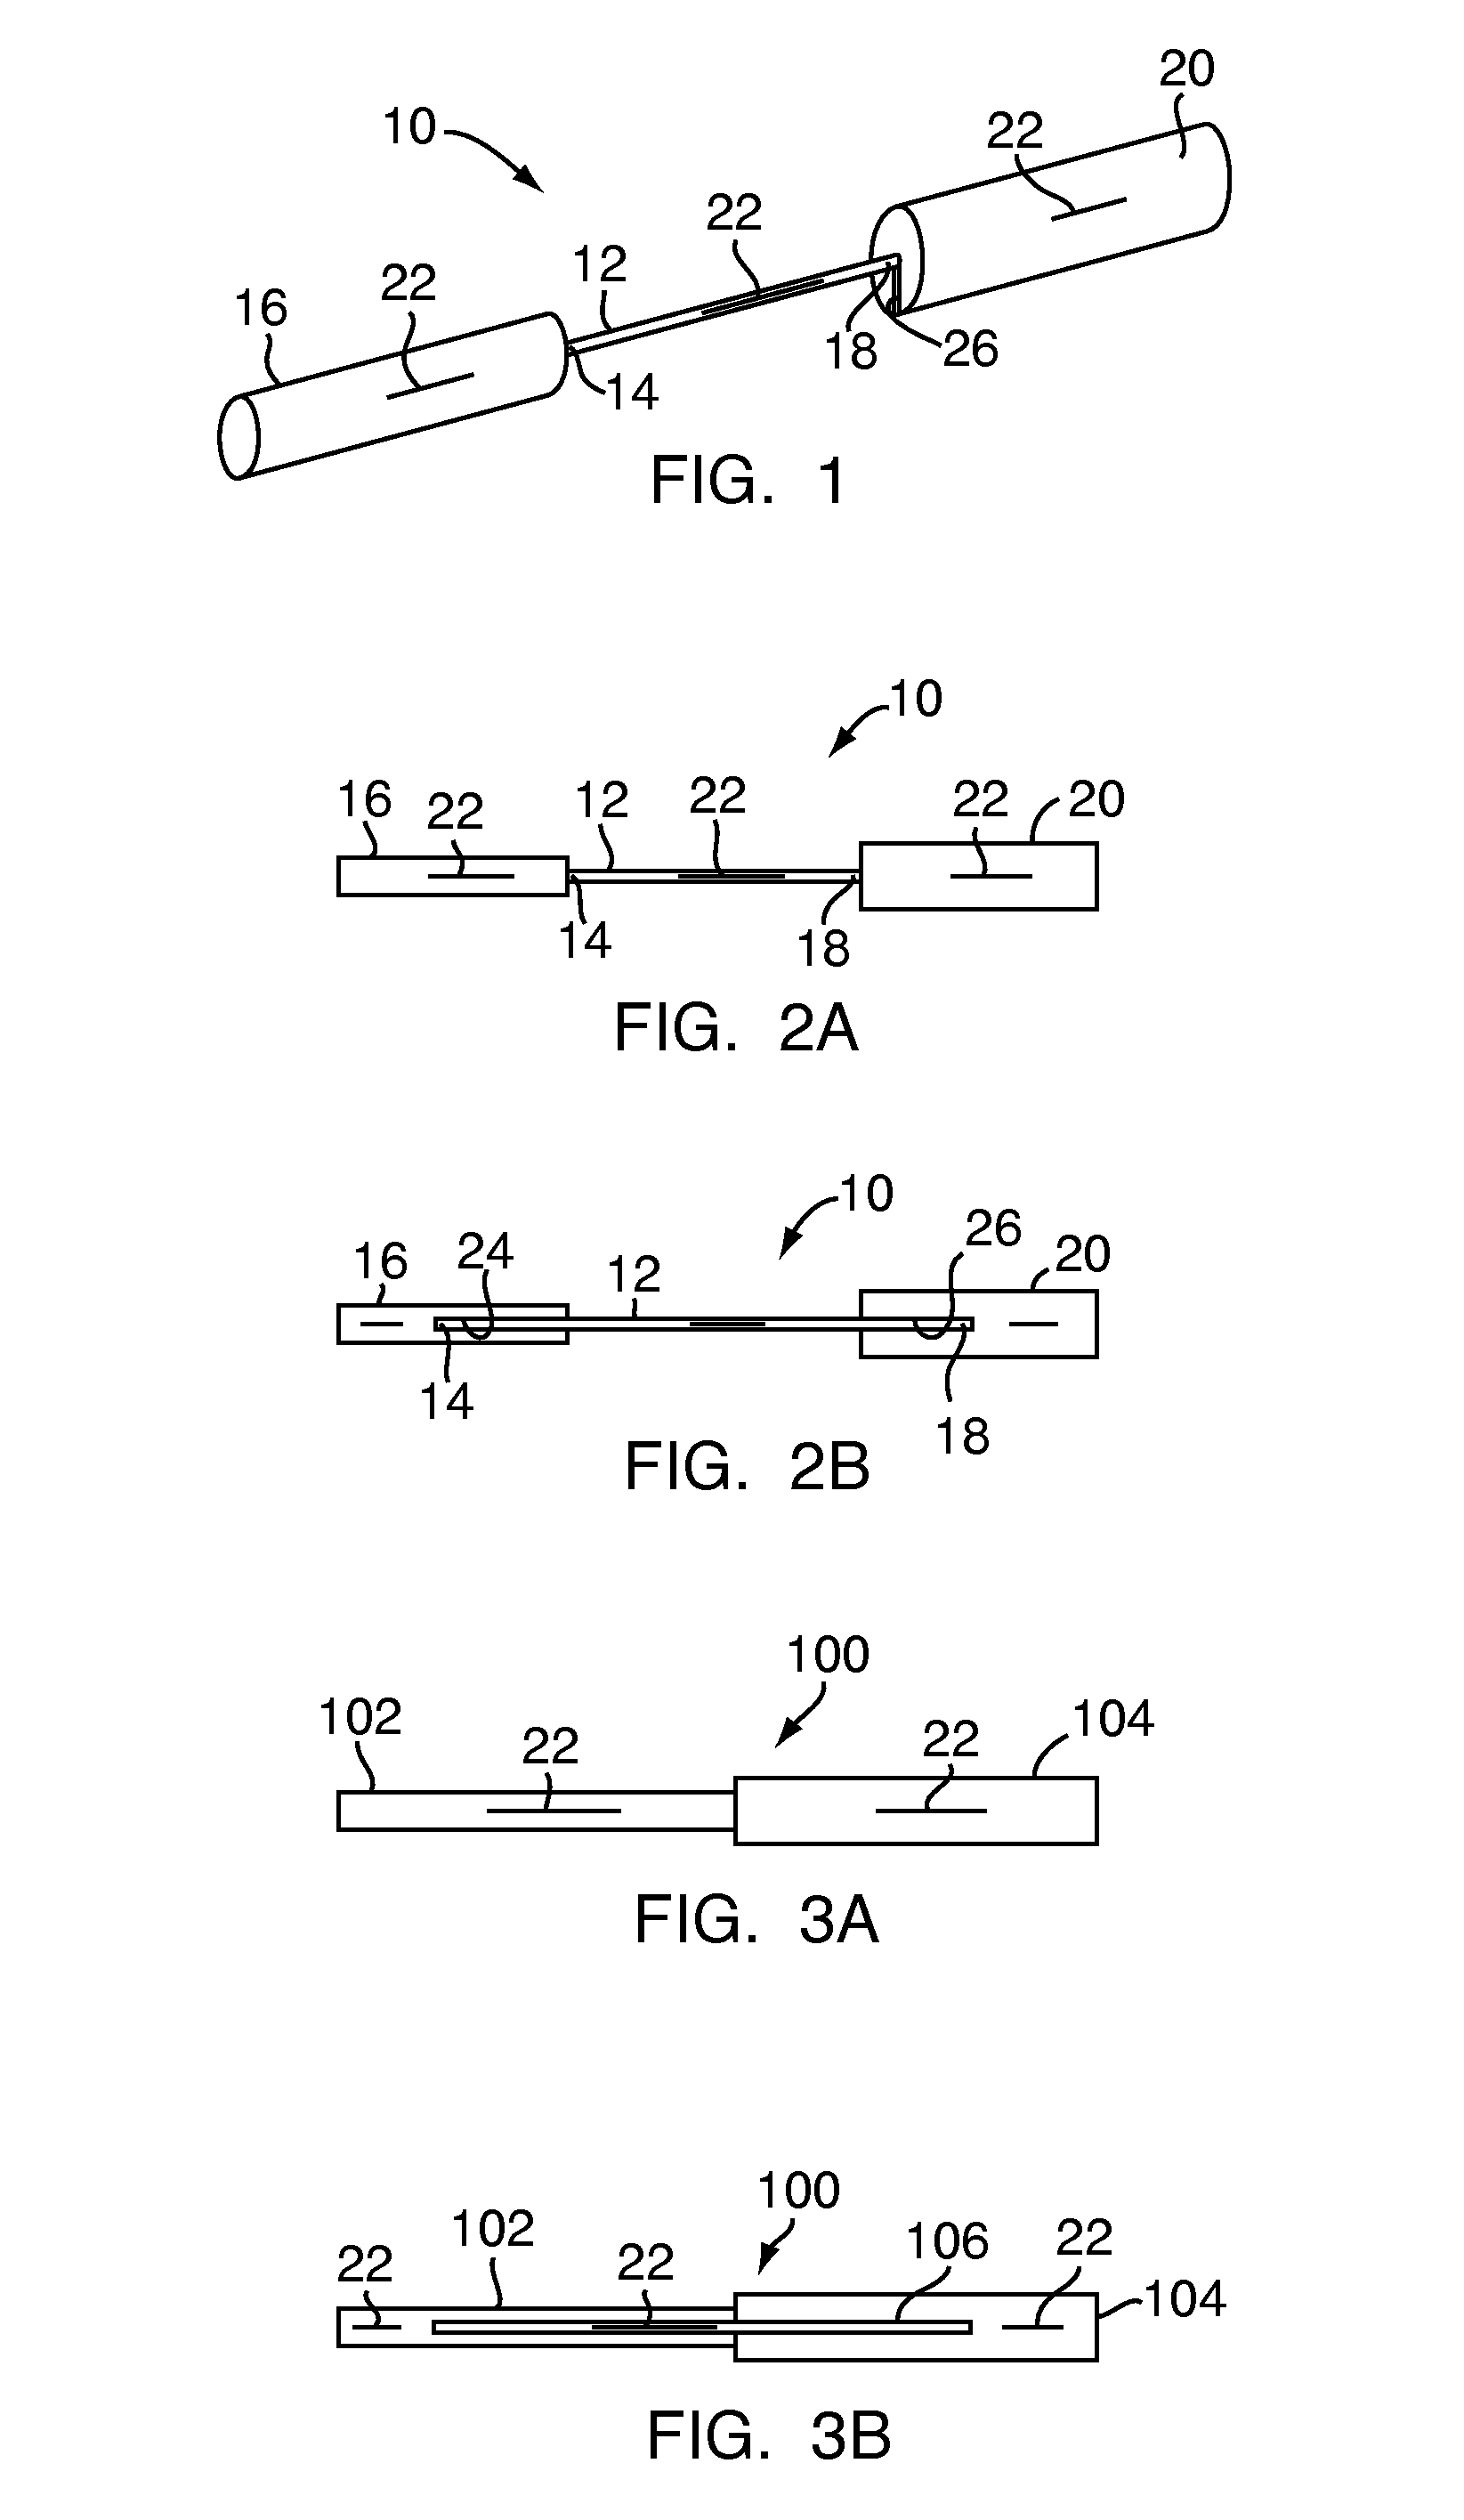 Method and apparatus for cleaning the interior cannula of laparoscopic and endoscopic access devices